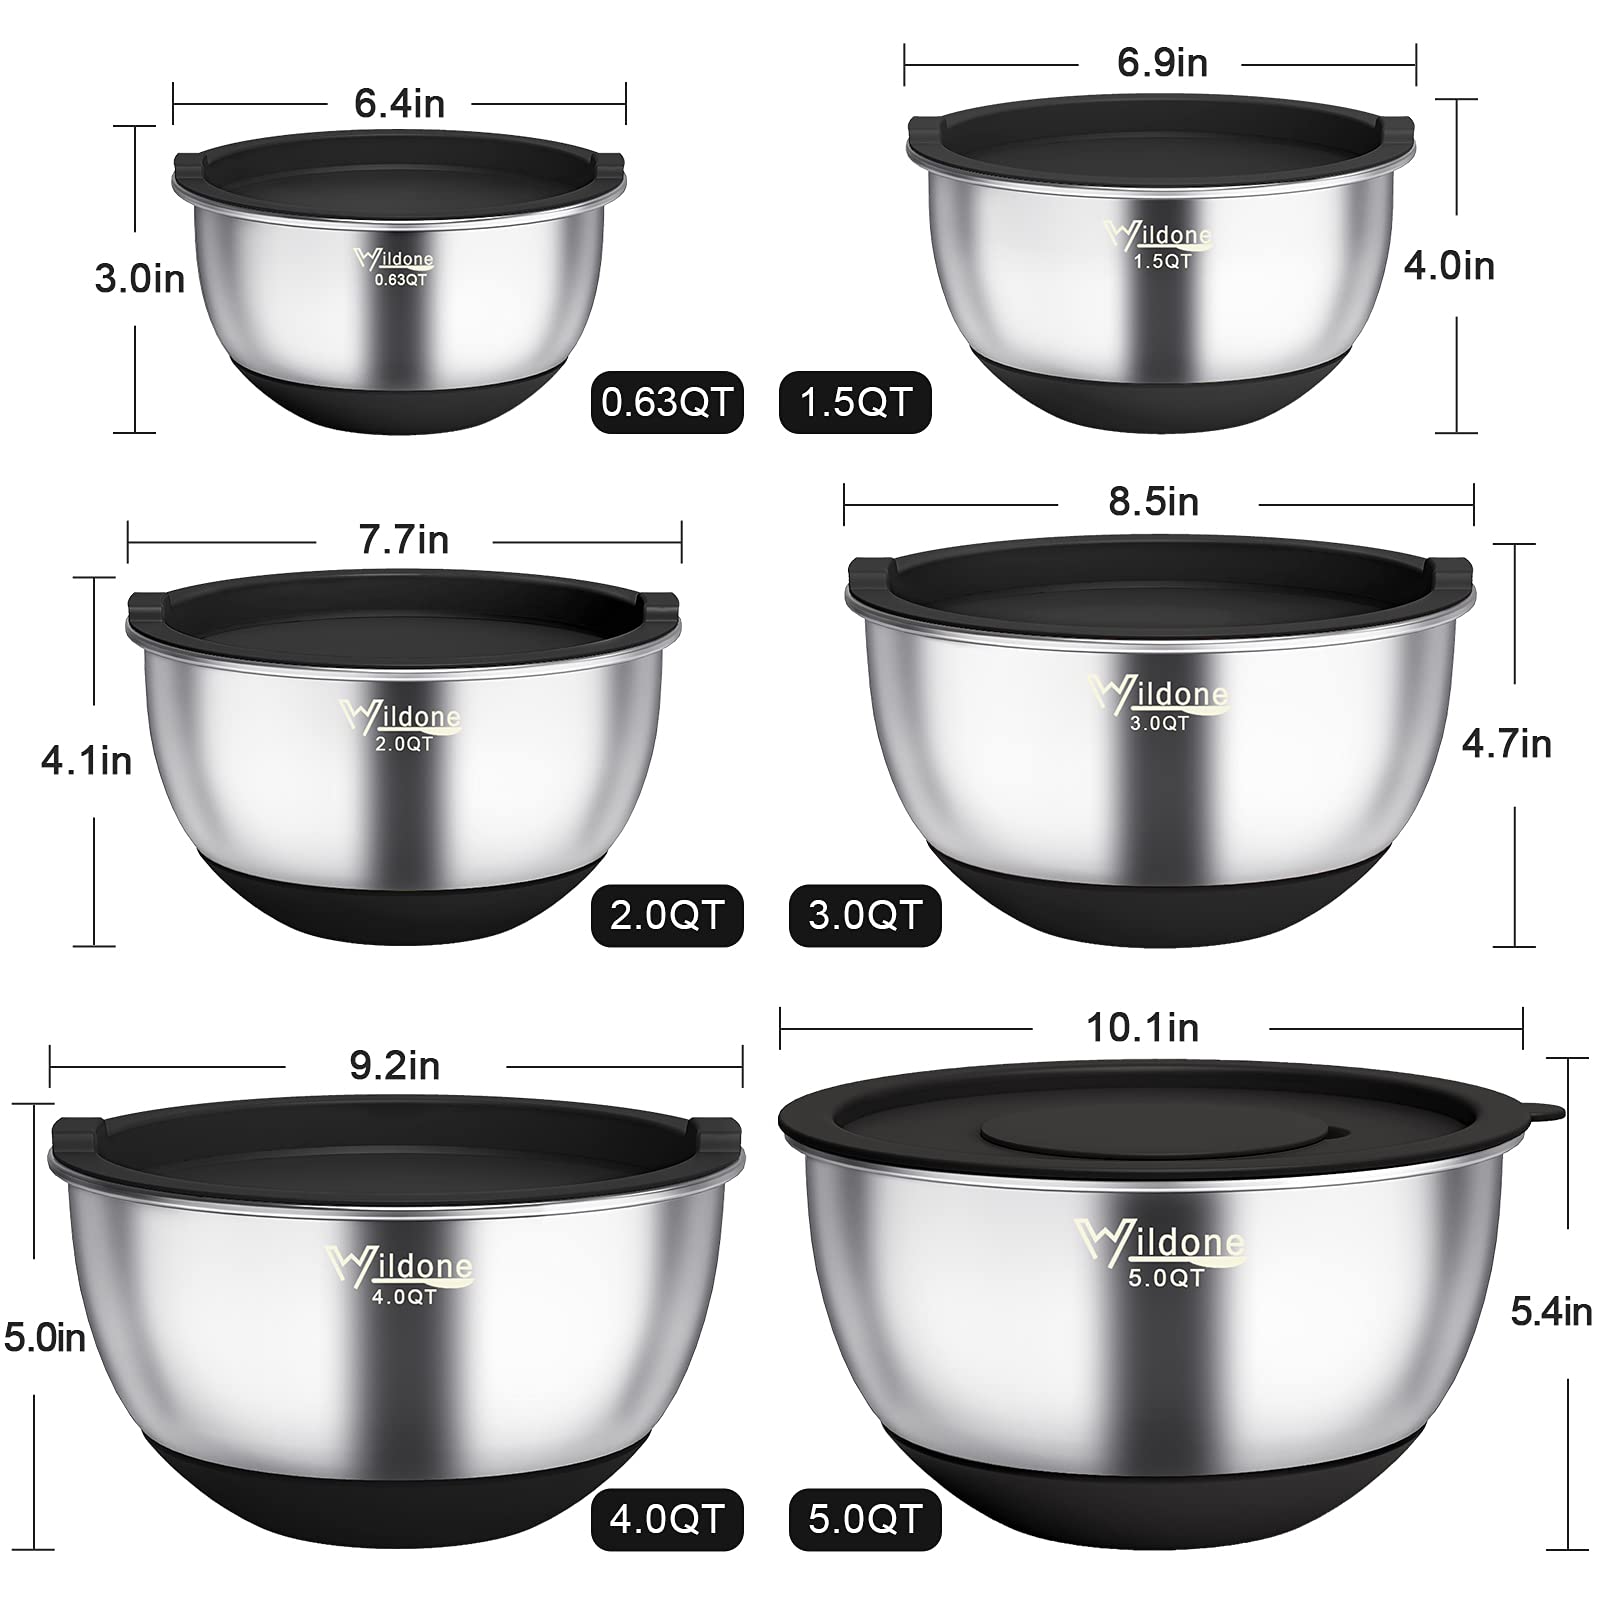 Wildone Mixing Bowls with Airtight Lids, 22 PCS Stainless Steel Nesting Bowls, with 3 Grater Attachments, Scale Marks & Non-Slip Bottom, Size 5, 4, 3, 2,1.5, 0.63QT, Ideal for Mixing & Prepping